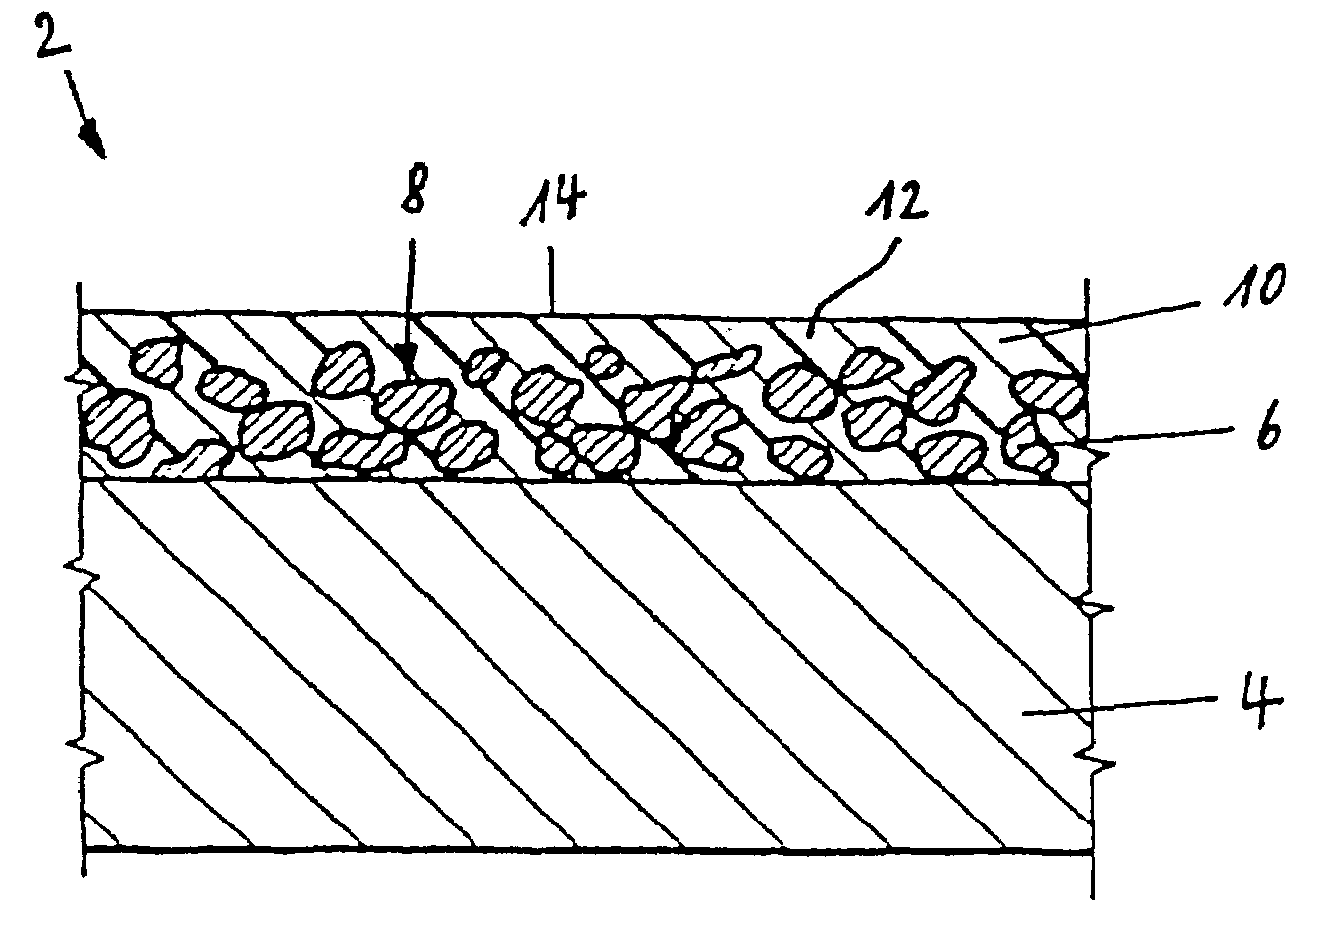 Friction bearing composite material with a metal base layer